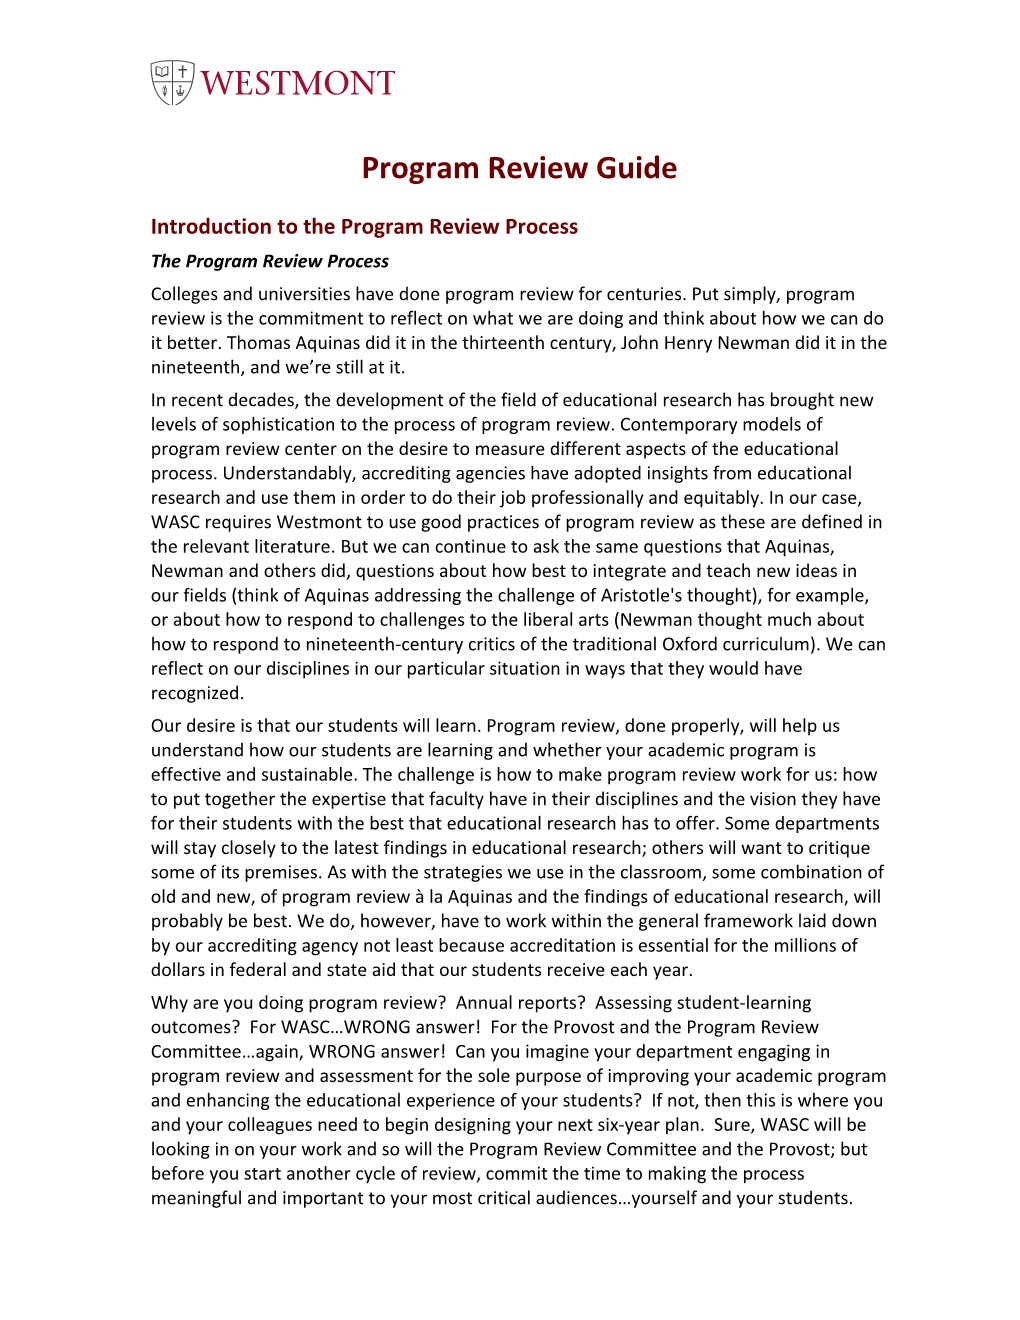 Introduction to the Program Review Process